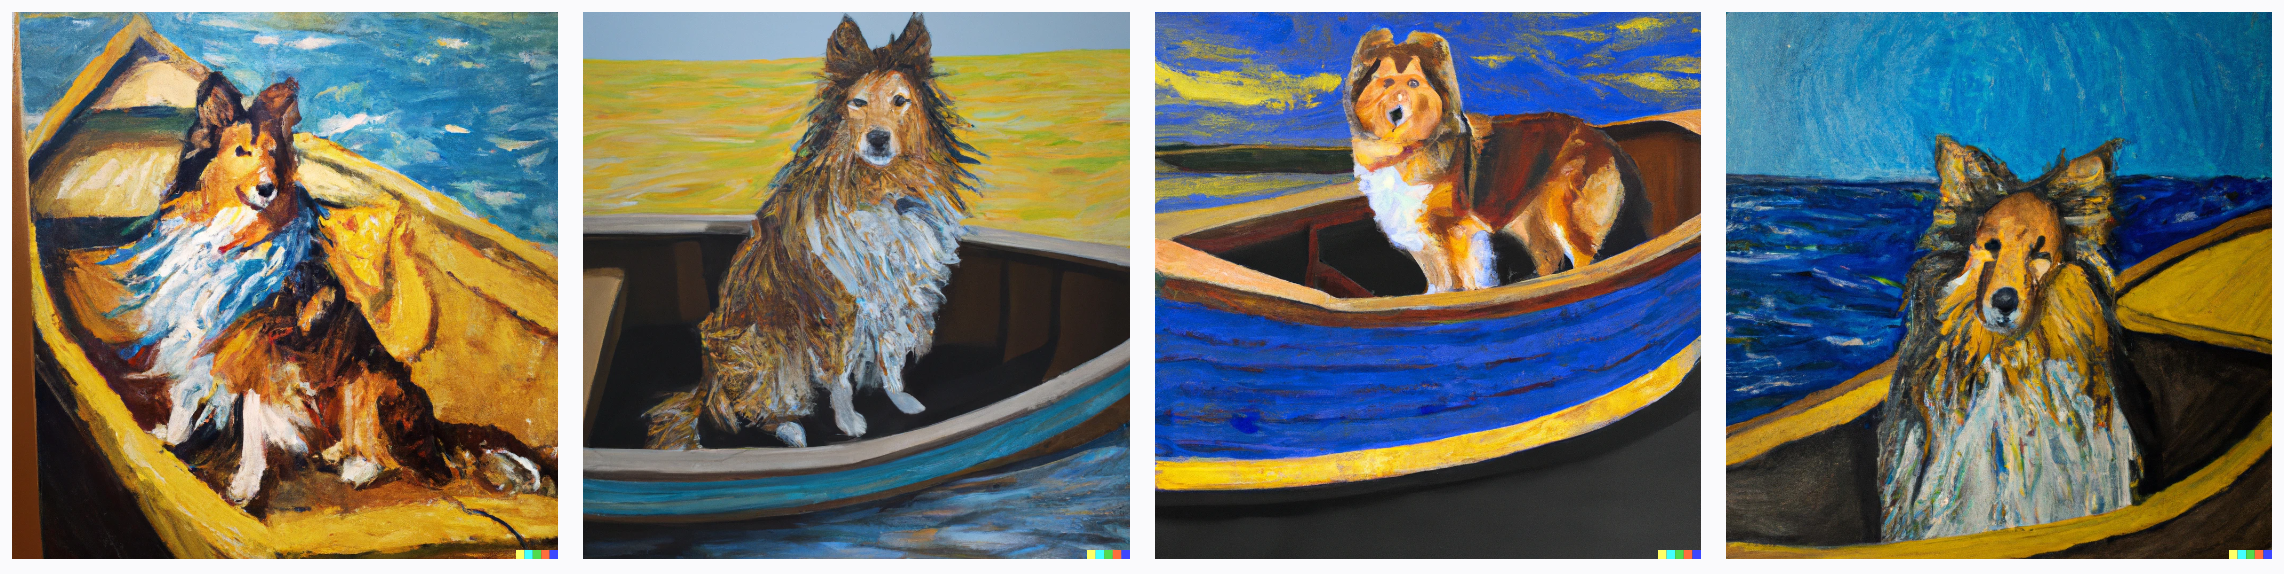 A sheltie on a boat in the style of Van Gogh